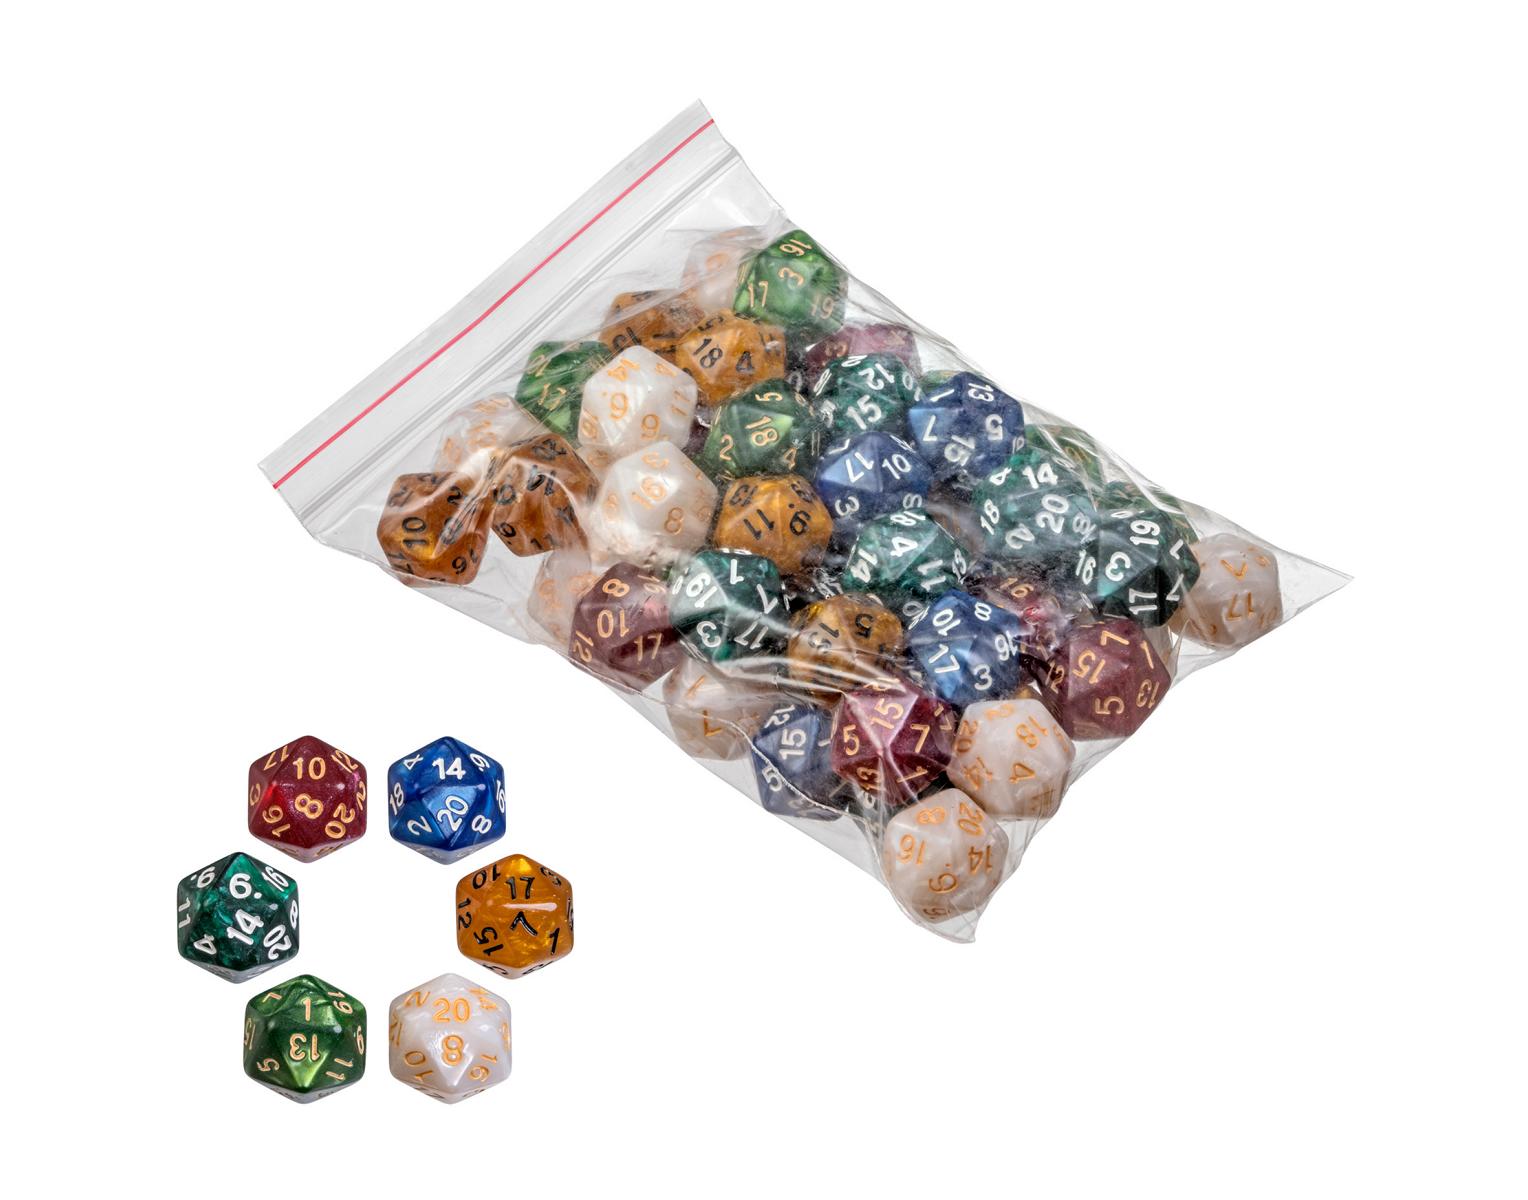 Dice, 20 sided, pearl, 50 pieces in polybag